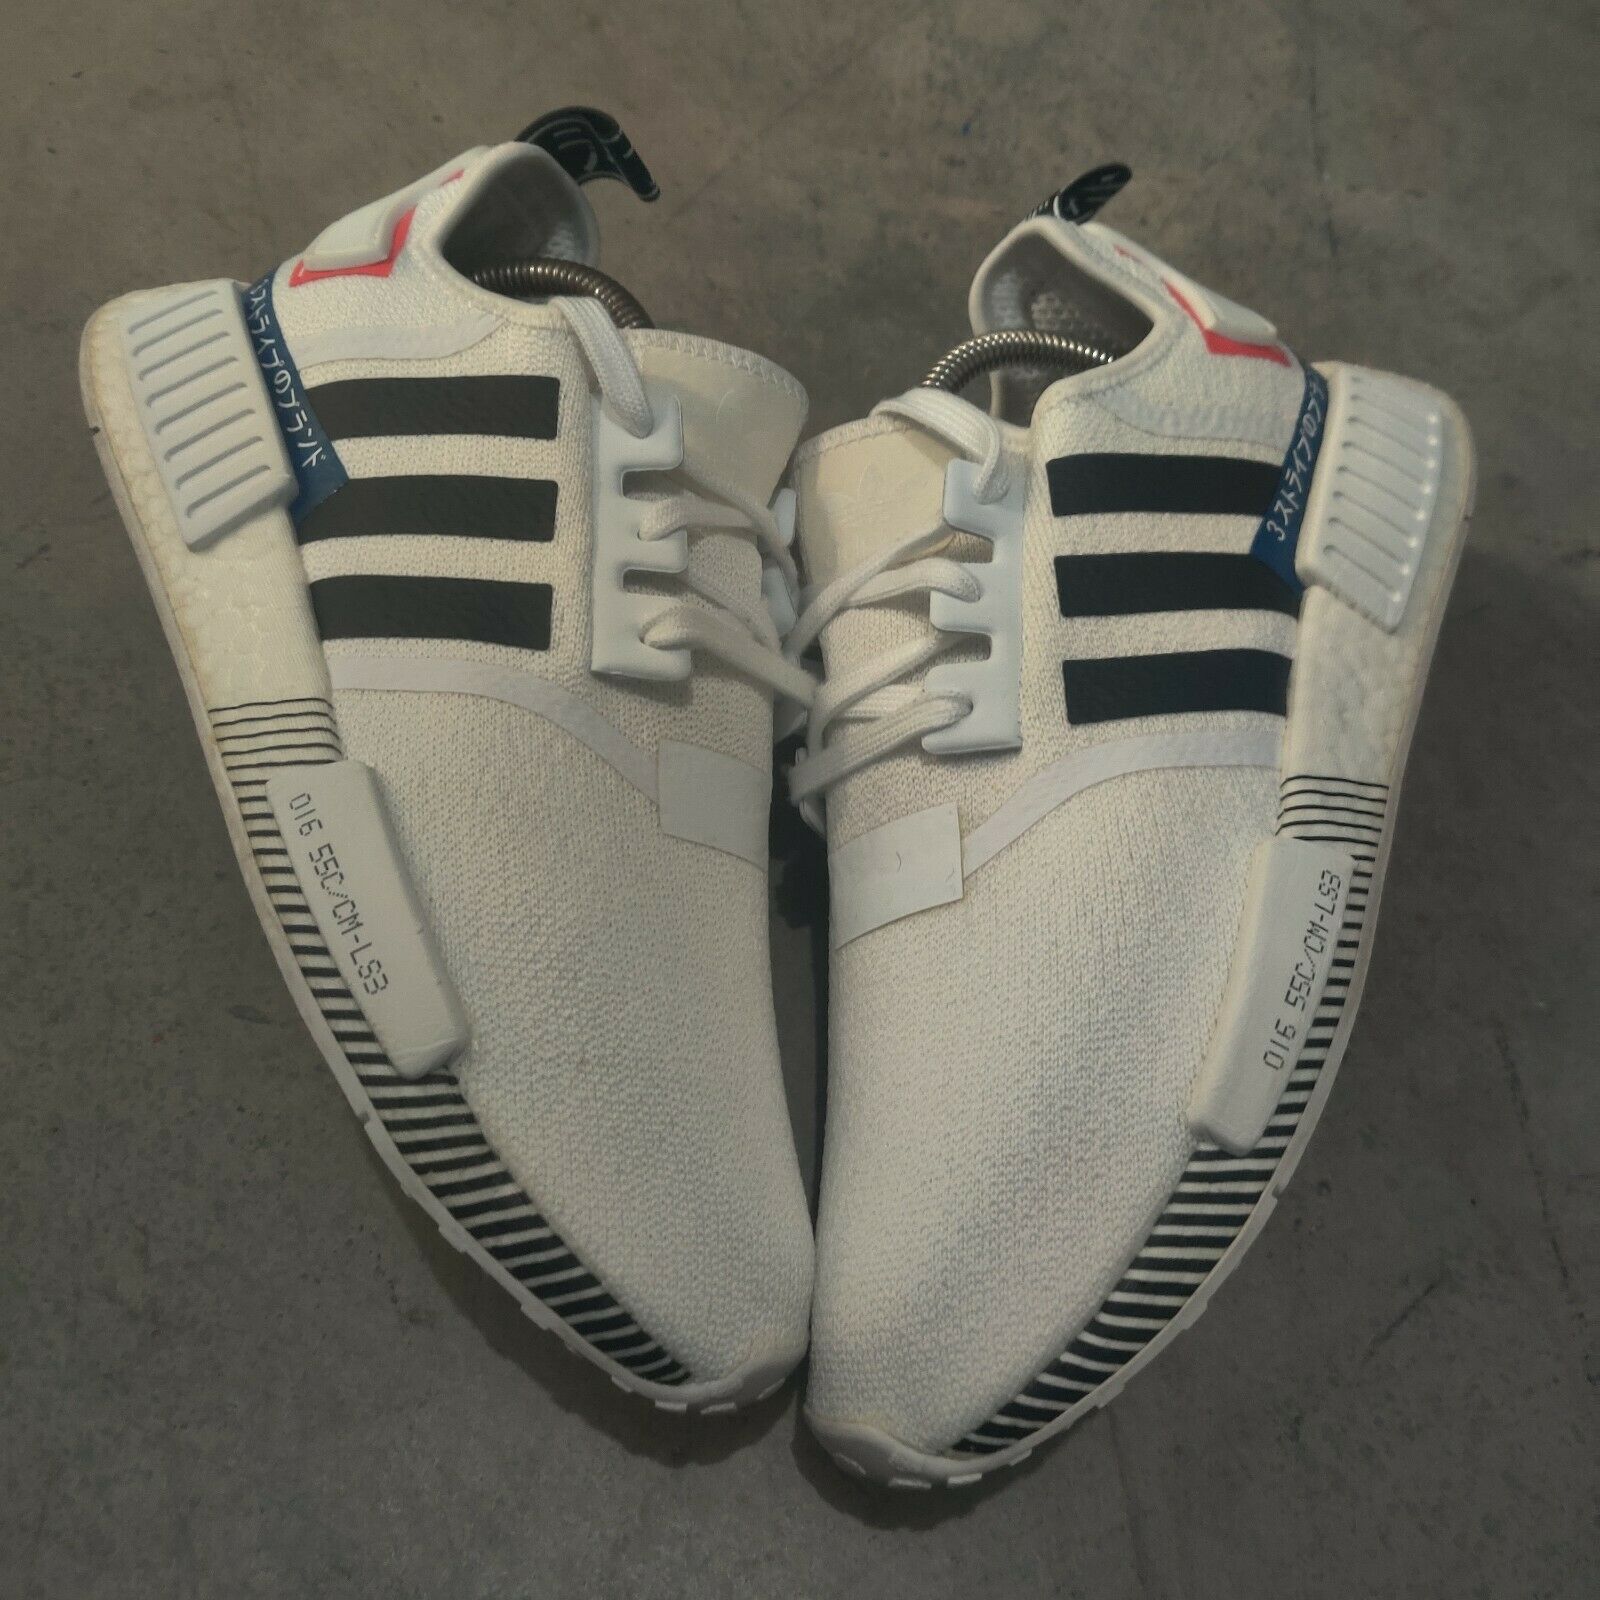 Adidas NMD R1 Japan White Colorblock EF2311 Shoes Sneakers